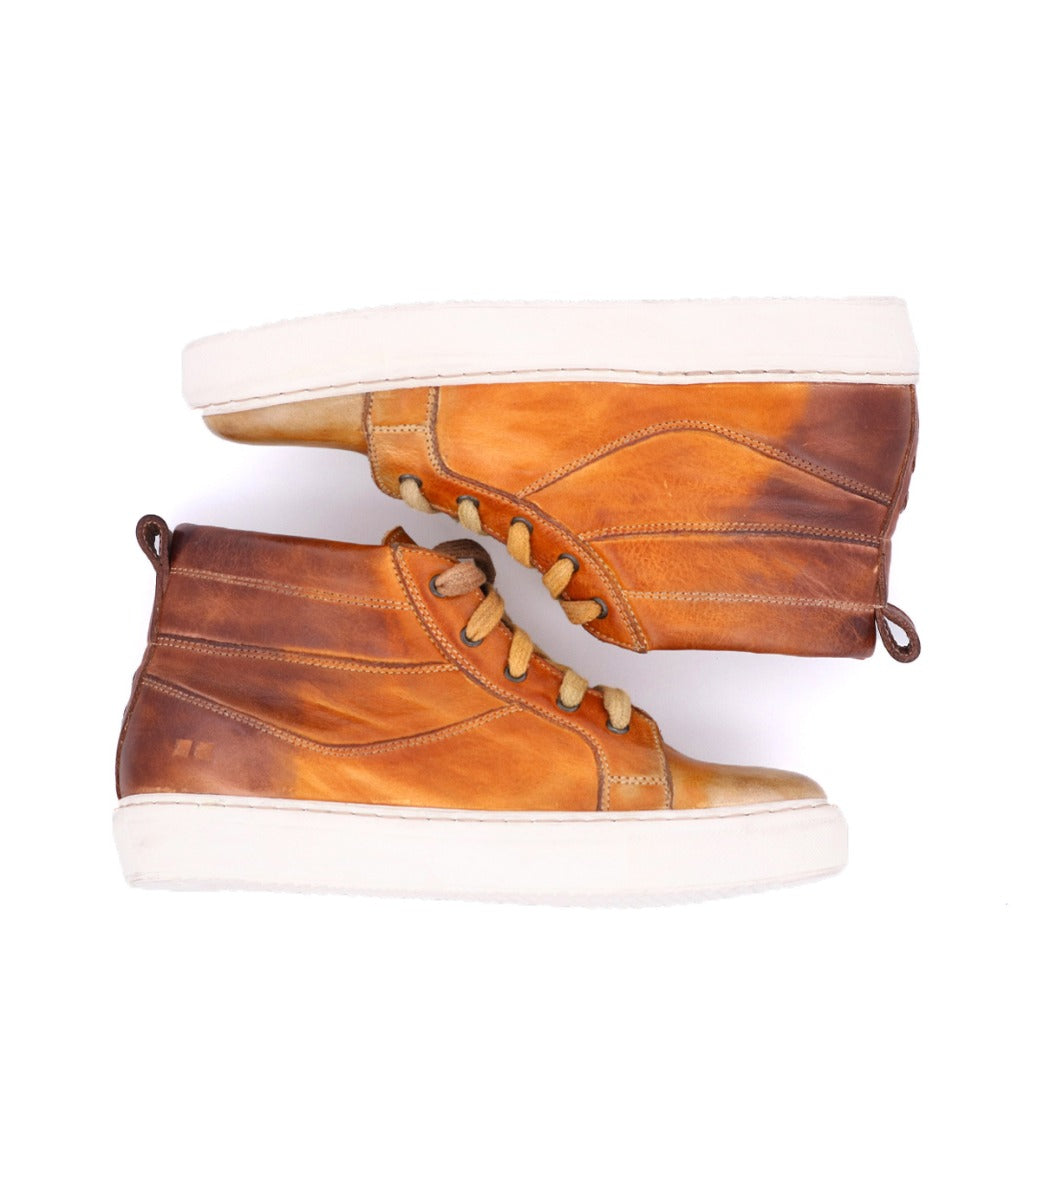 A pair of Bed Stu Rossela brown leather sneakers on a white background.